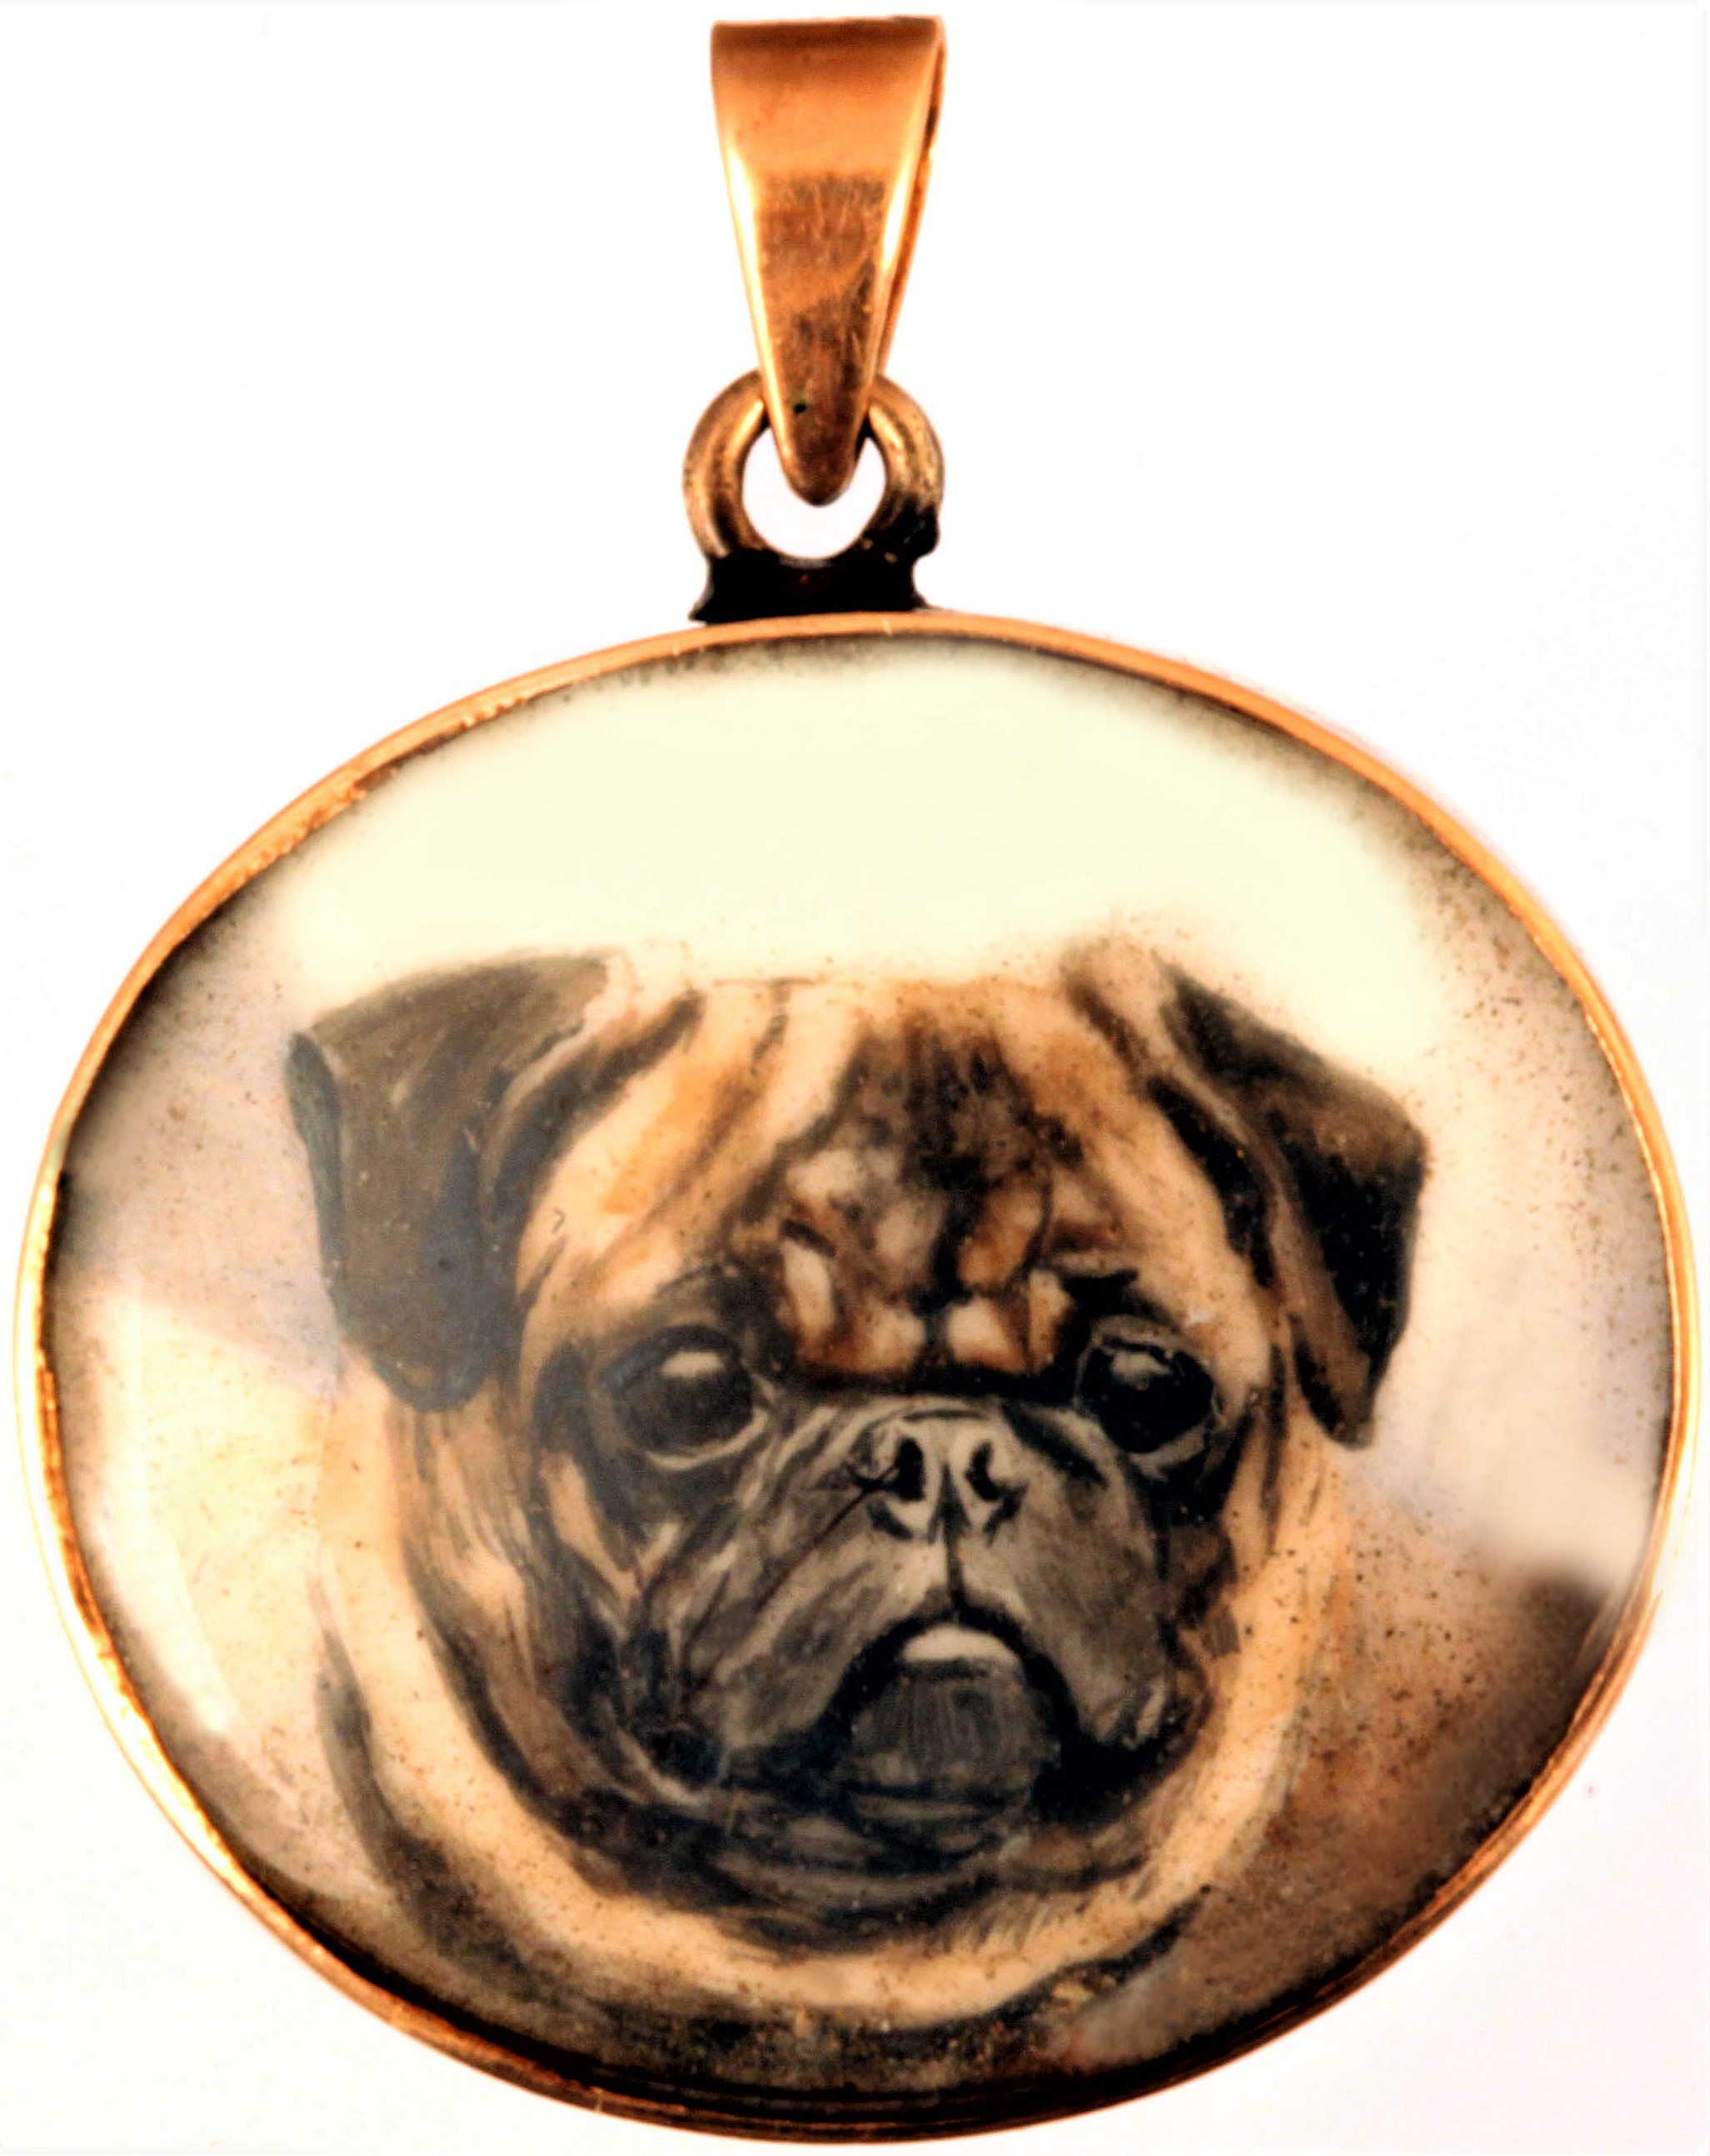 Click to see full size: Pendant of the Pug, Jack of Hearts by Reuben Ward Binks (1880-1950)